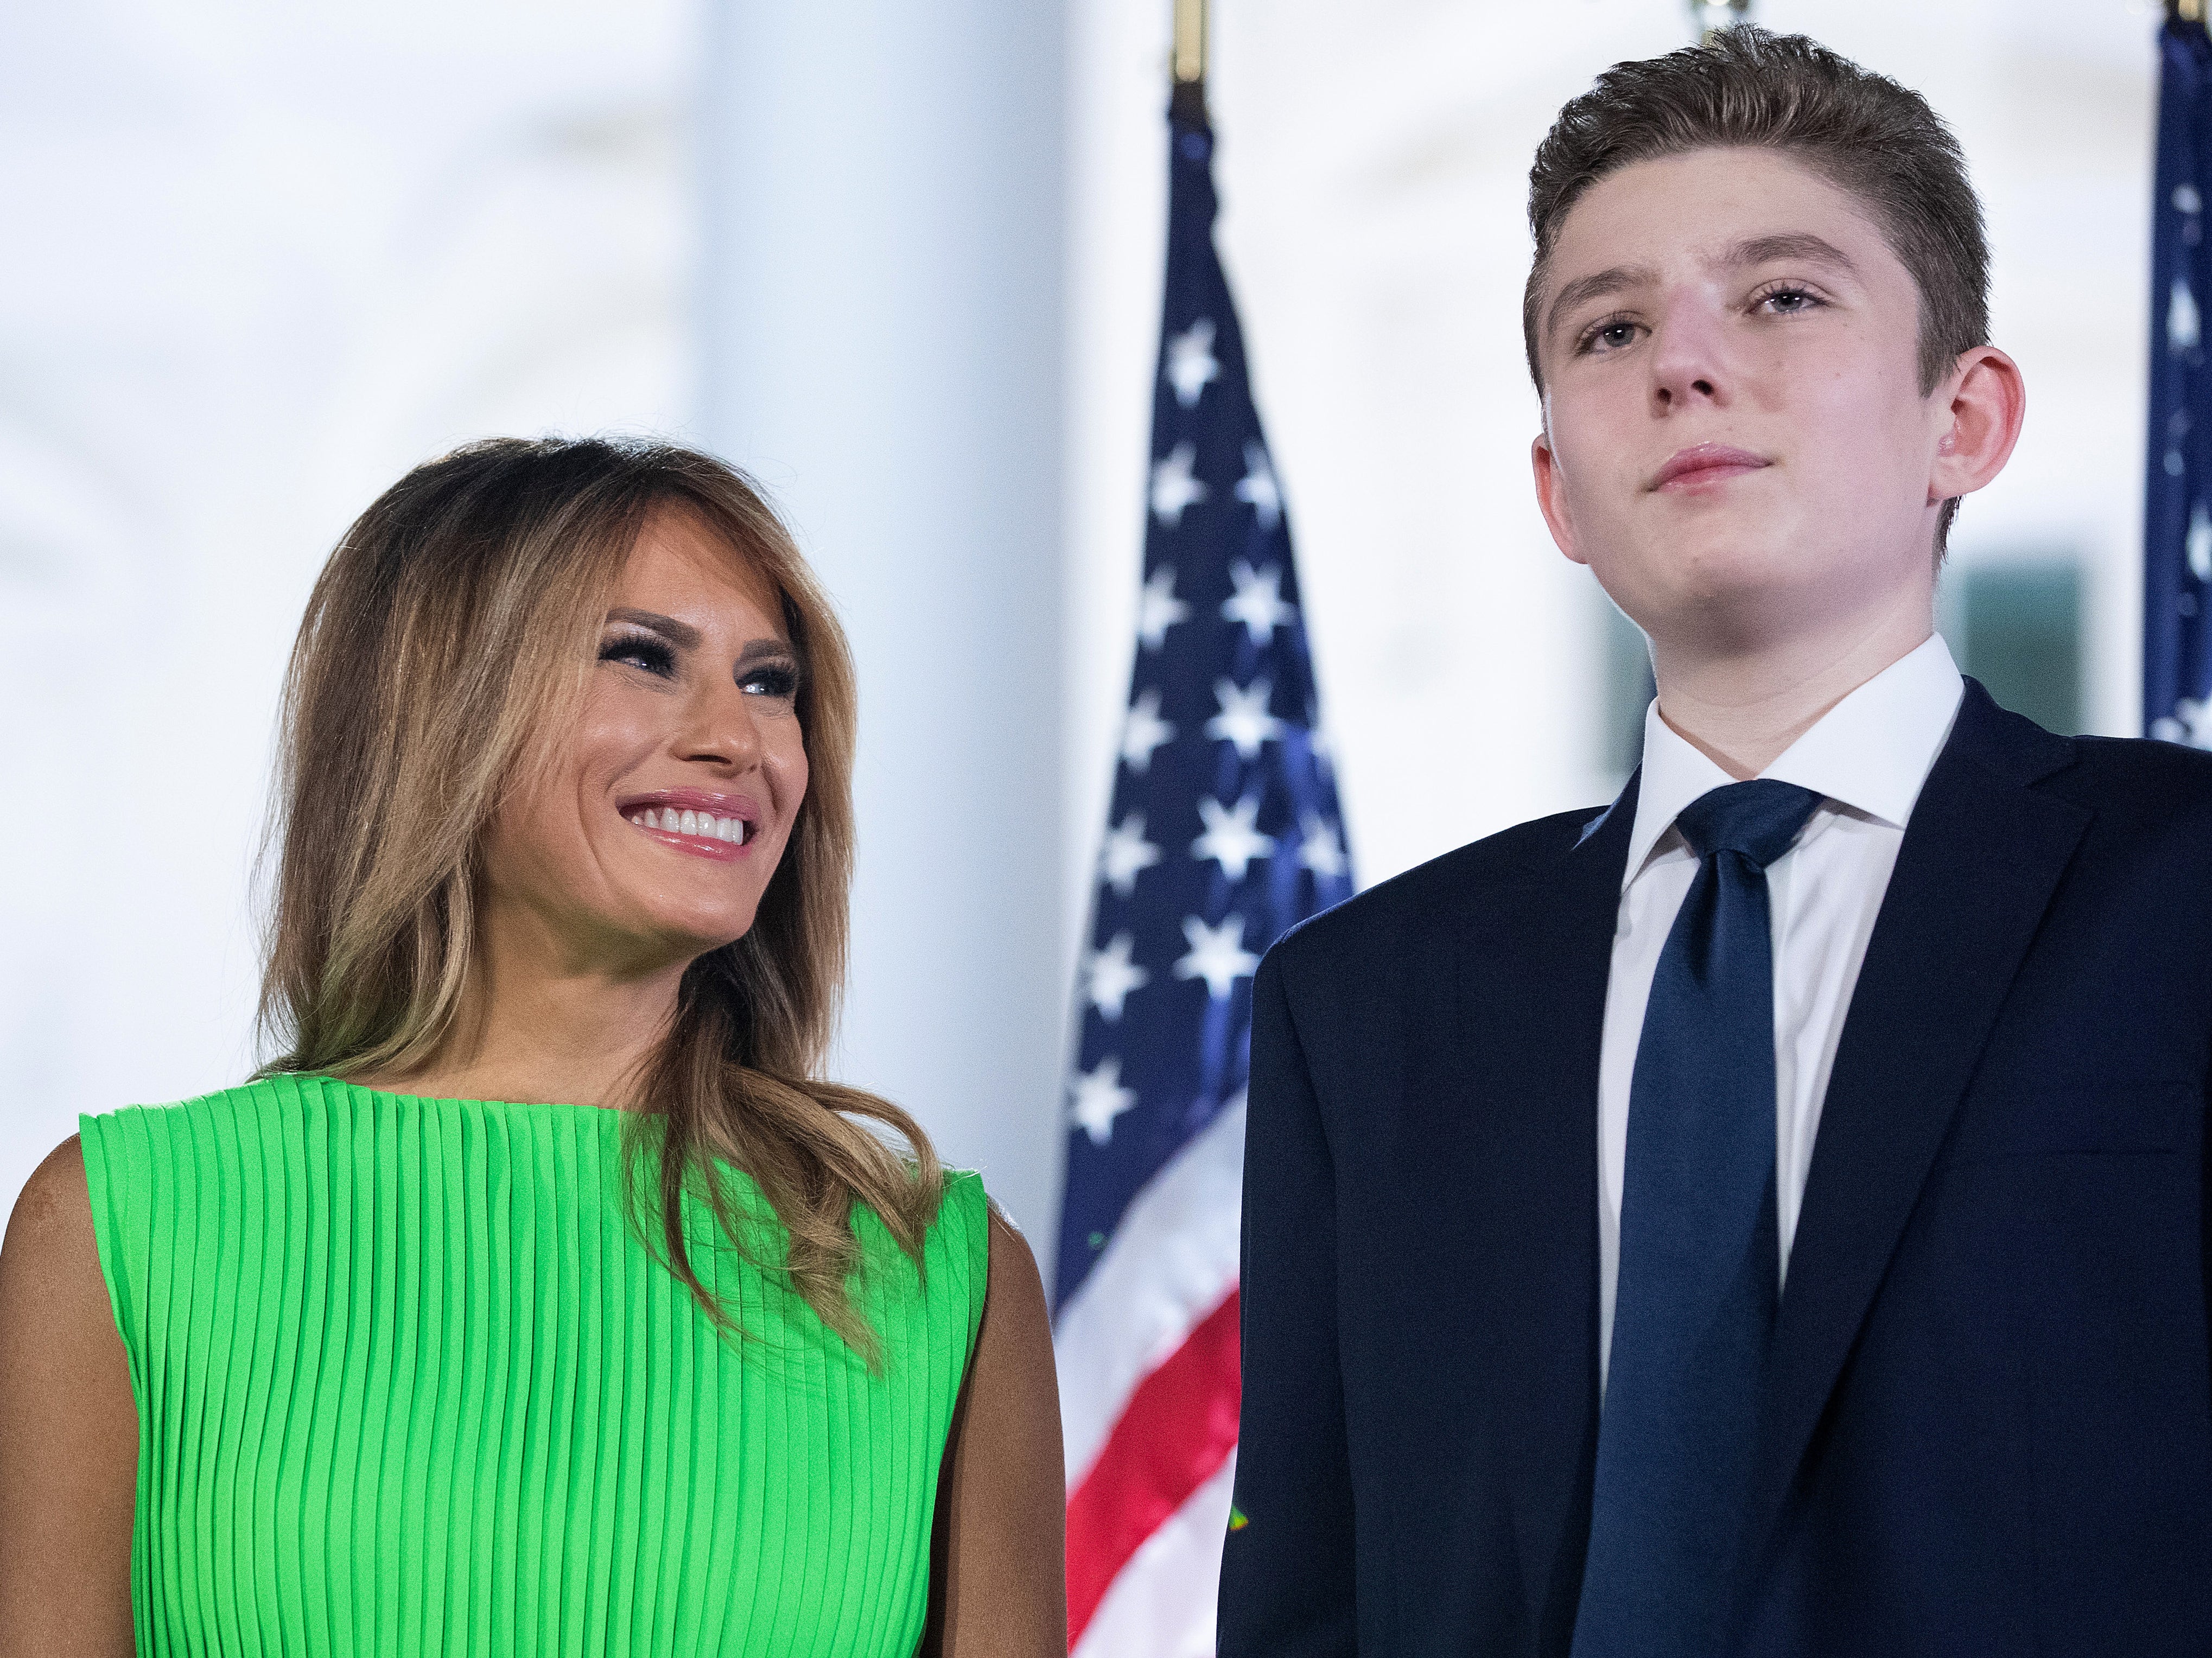 First lady Melania Trump (L) looks at her son Barron Trump after U.S. President Donald Trump delivered his acceptance speech for the Republican presidential nomination on the South Lawn of the White House August 27, 2020 in Washington, DC.